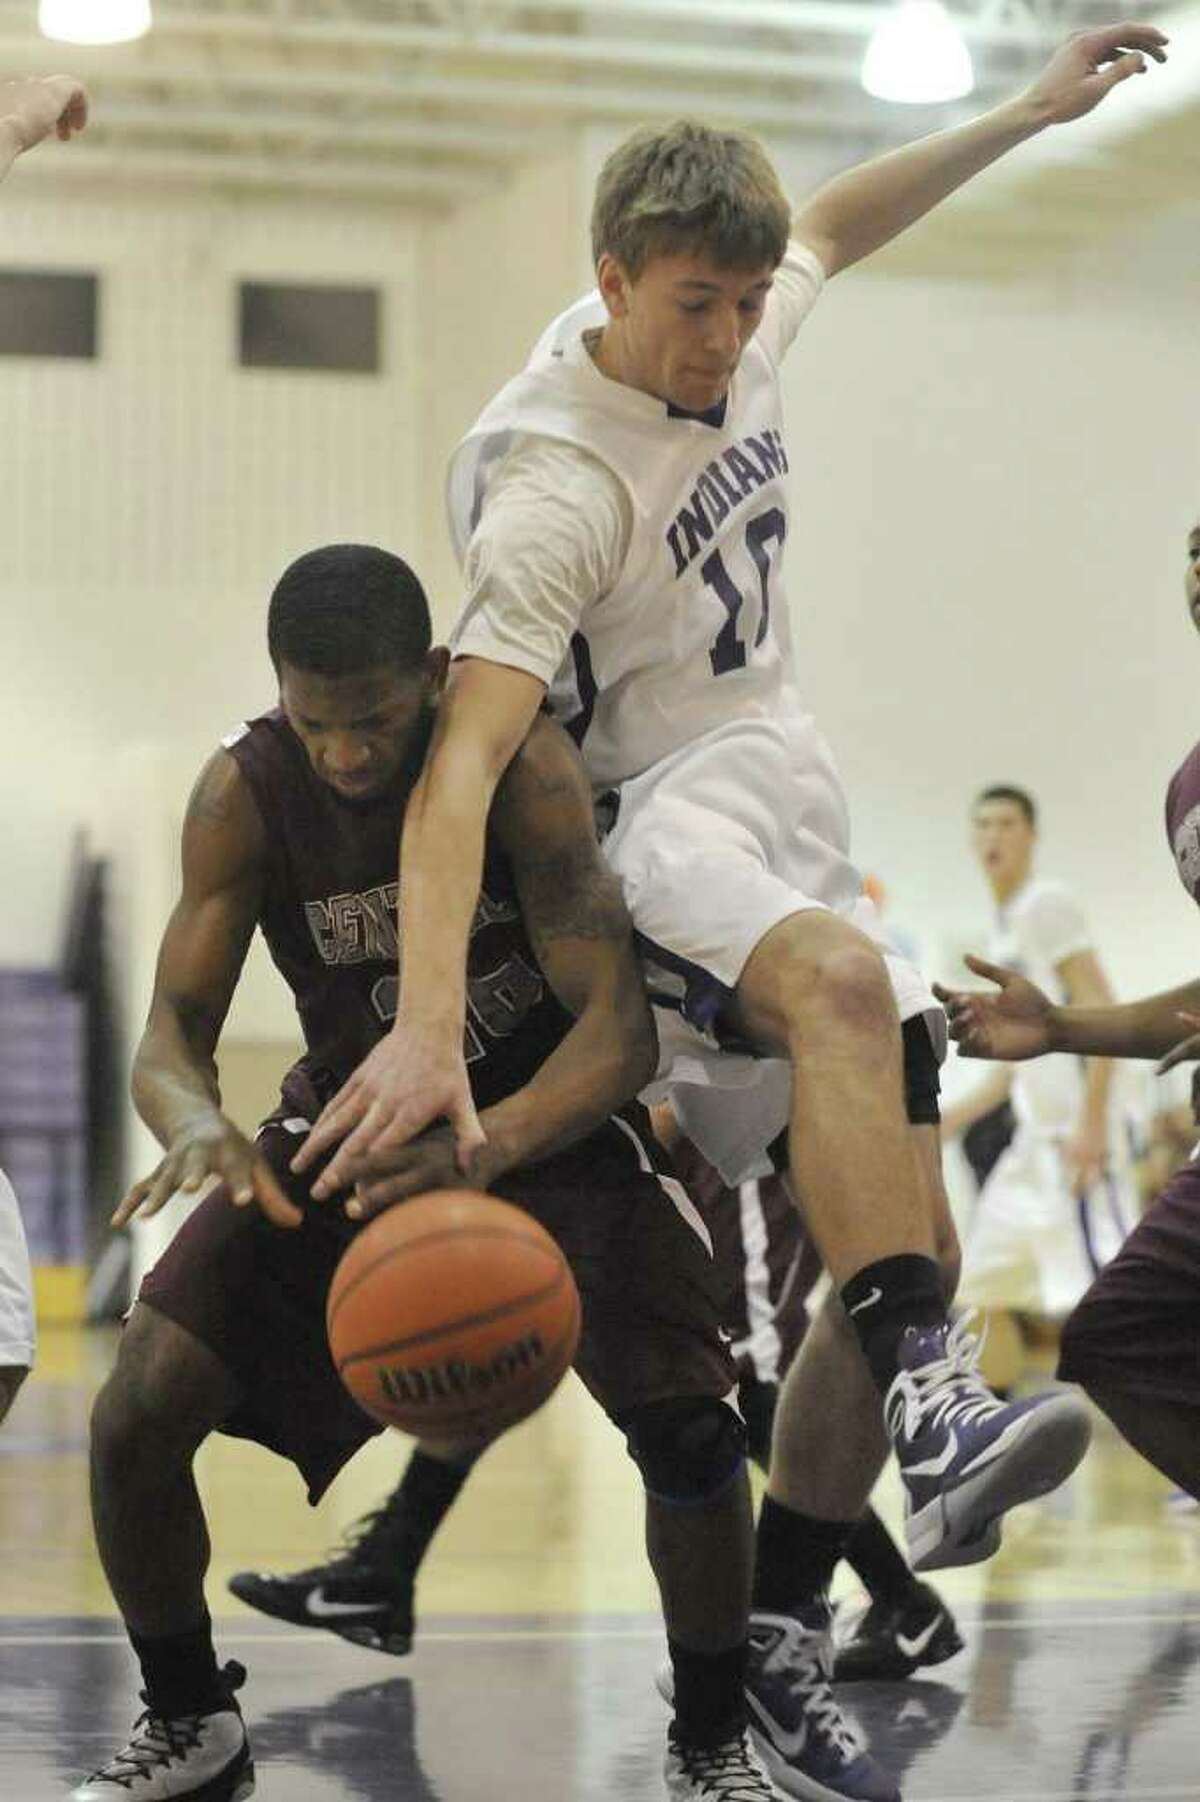 PN-G's Travis Miller, top, battles for a rebound against Central's Kristain Smith, in the first hafl of their District 20-4A game at Port Neches-Groves High School on Friday, January 21, 2011. Valentino Mauricio/The Enterprise